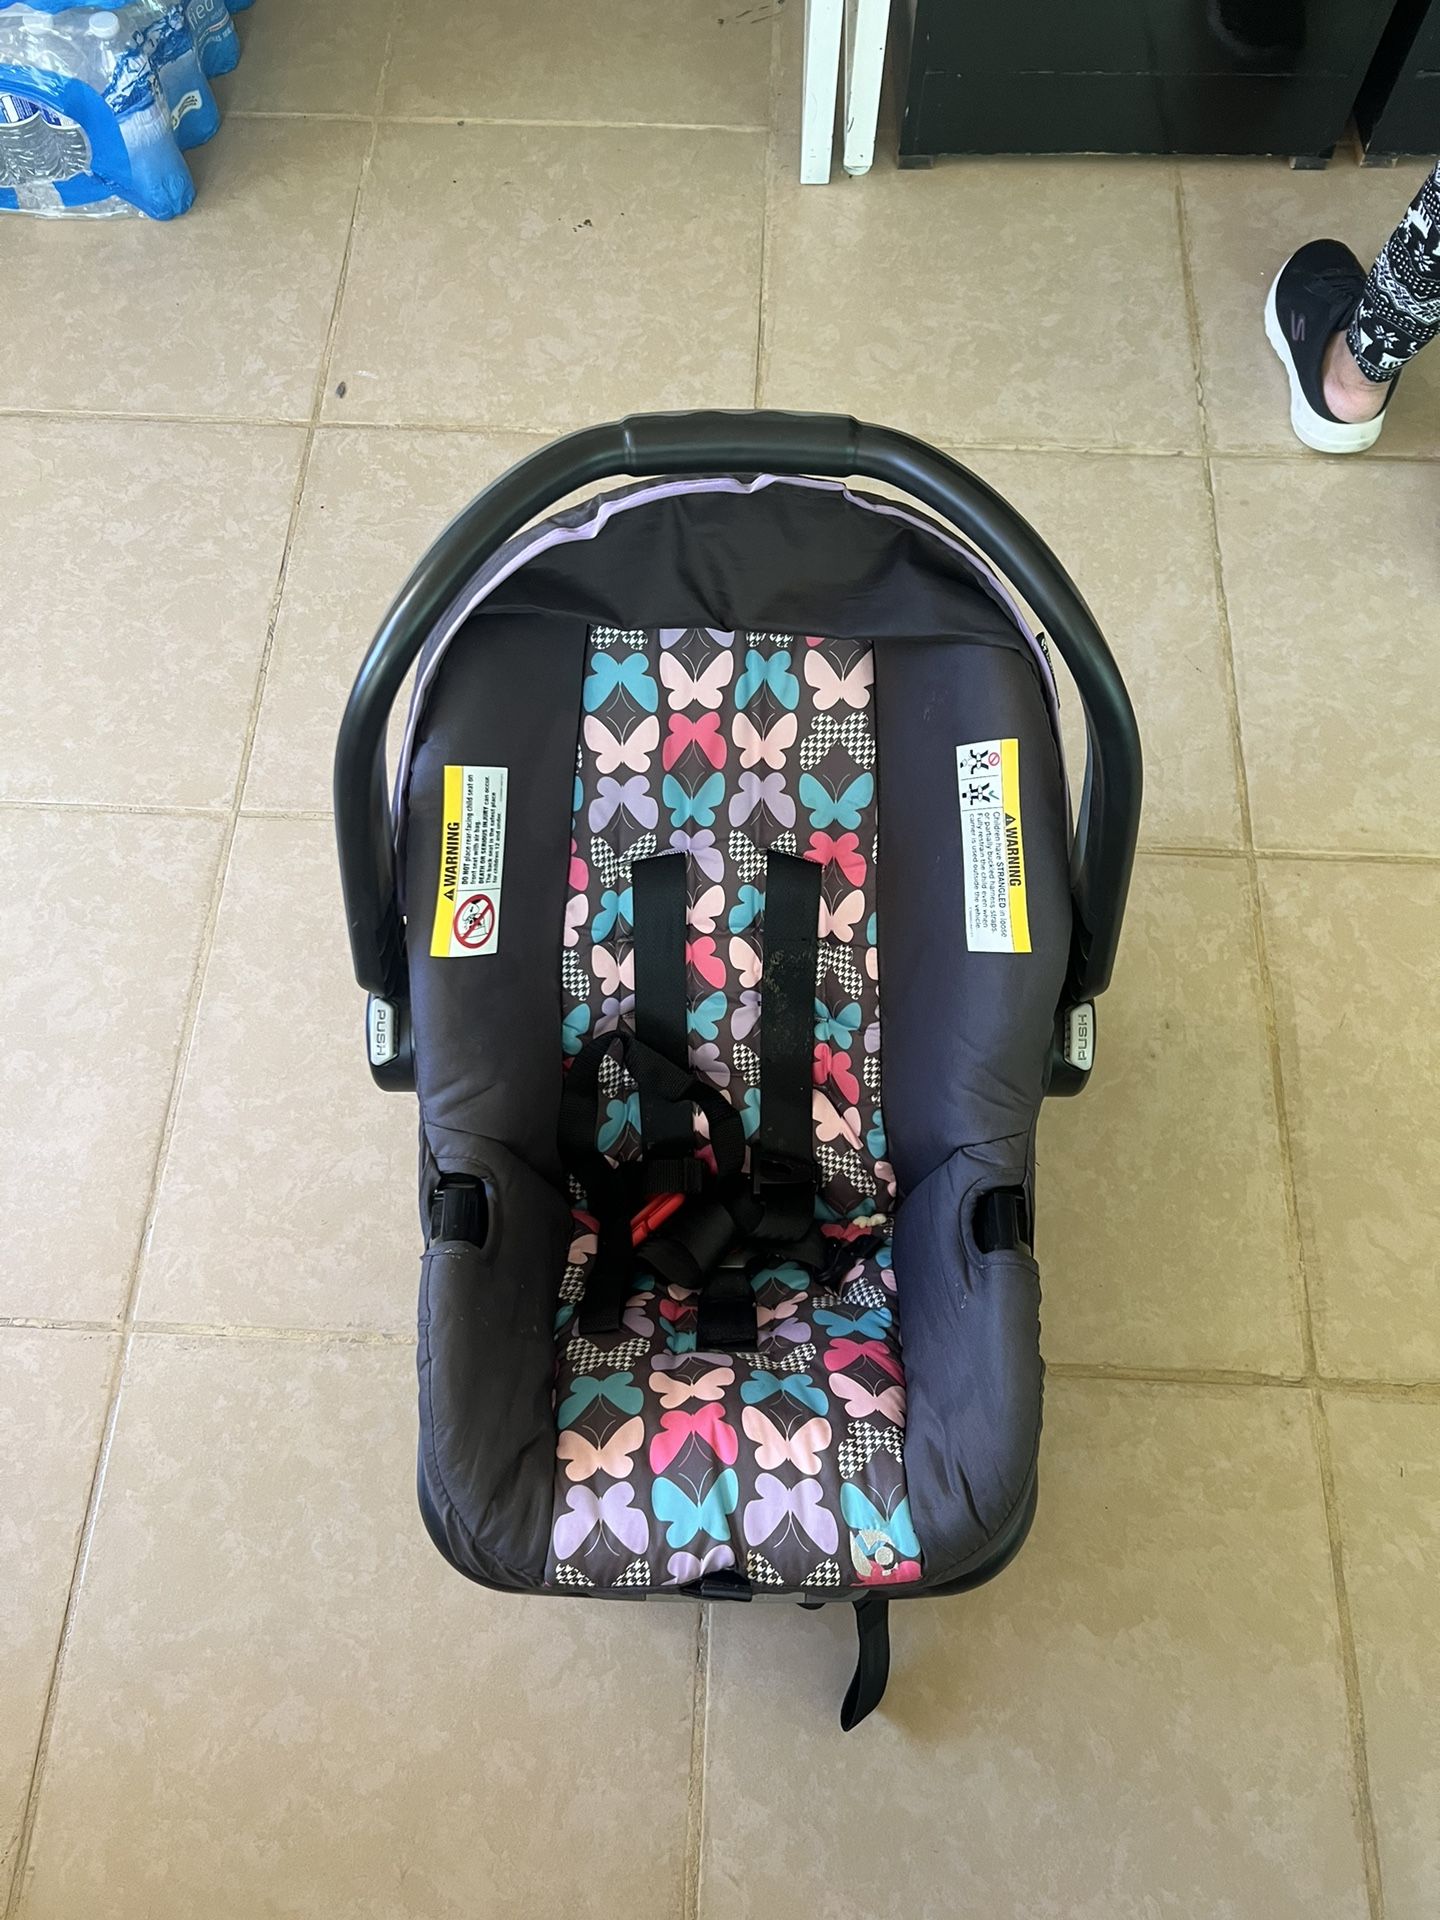 Baby trend Infant Car Seat